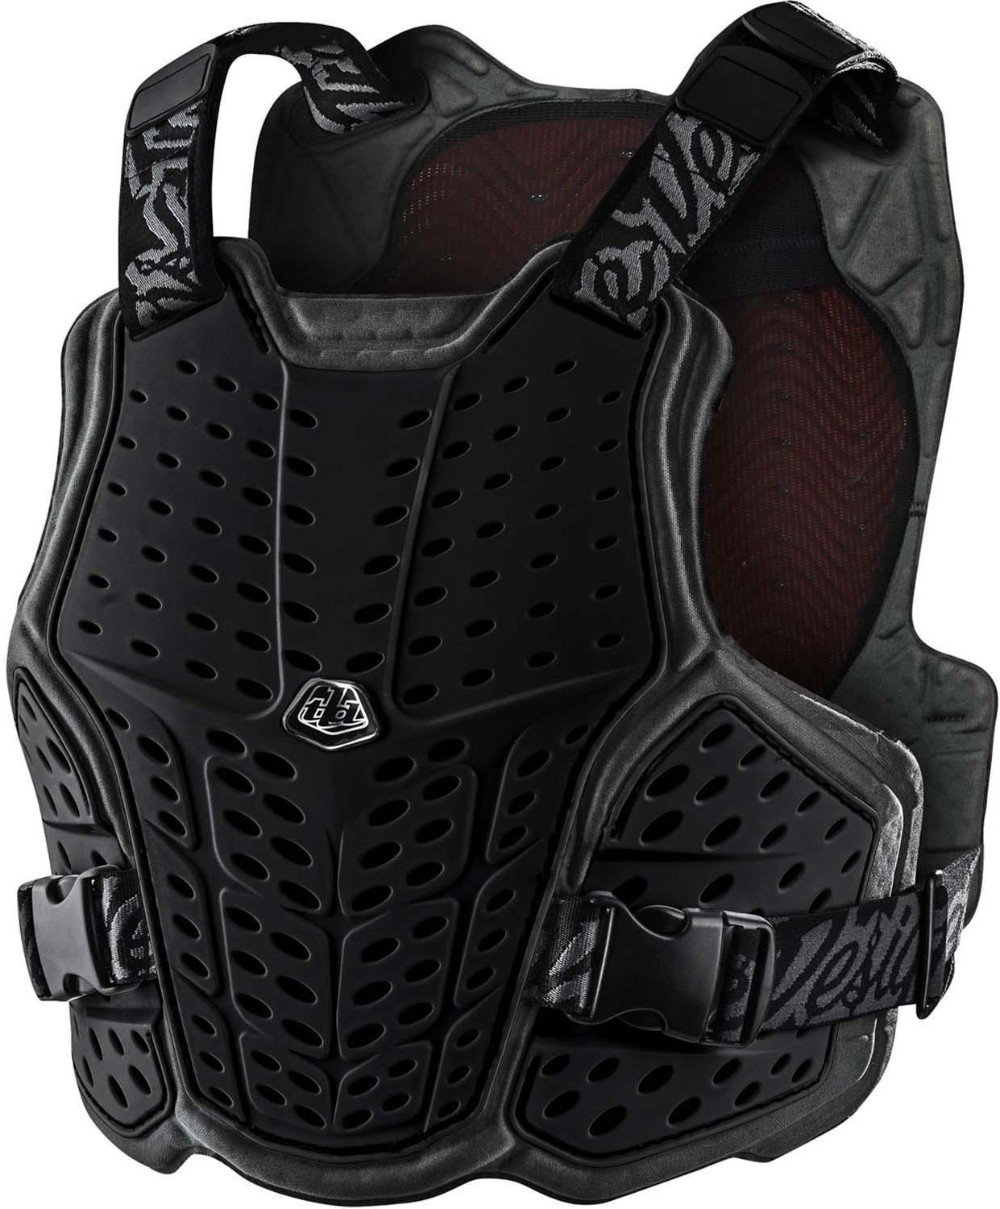 Rockfight Youth MTB Cylcing Chest Protector image 0